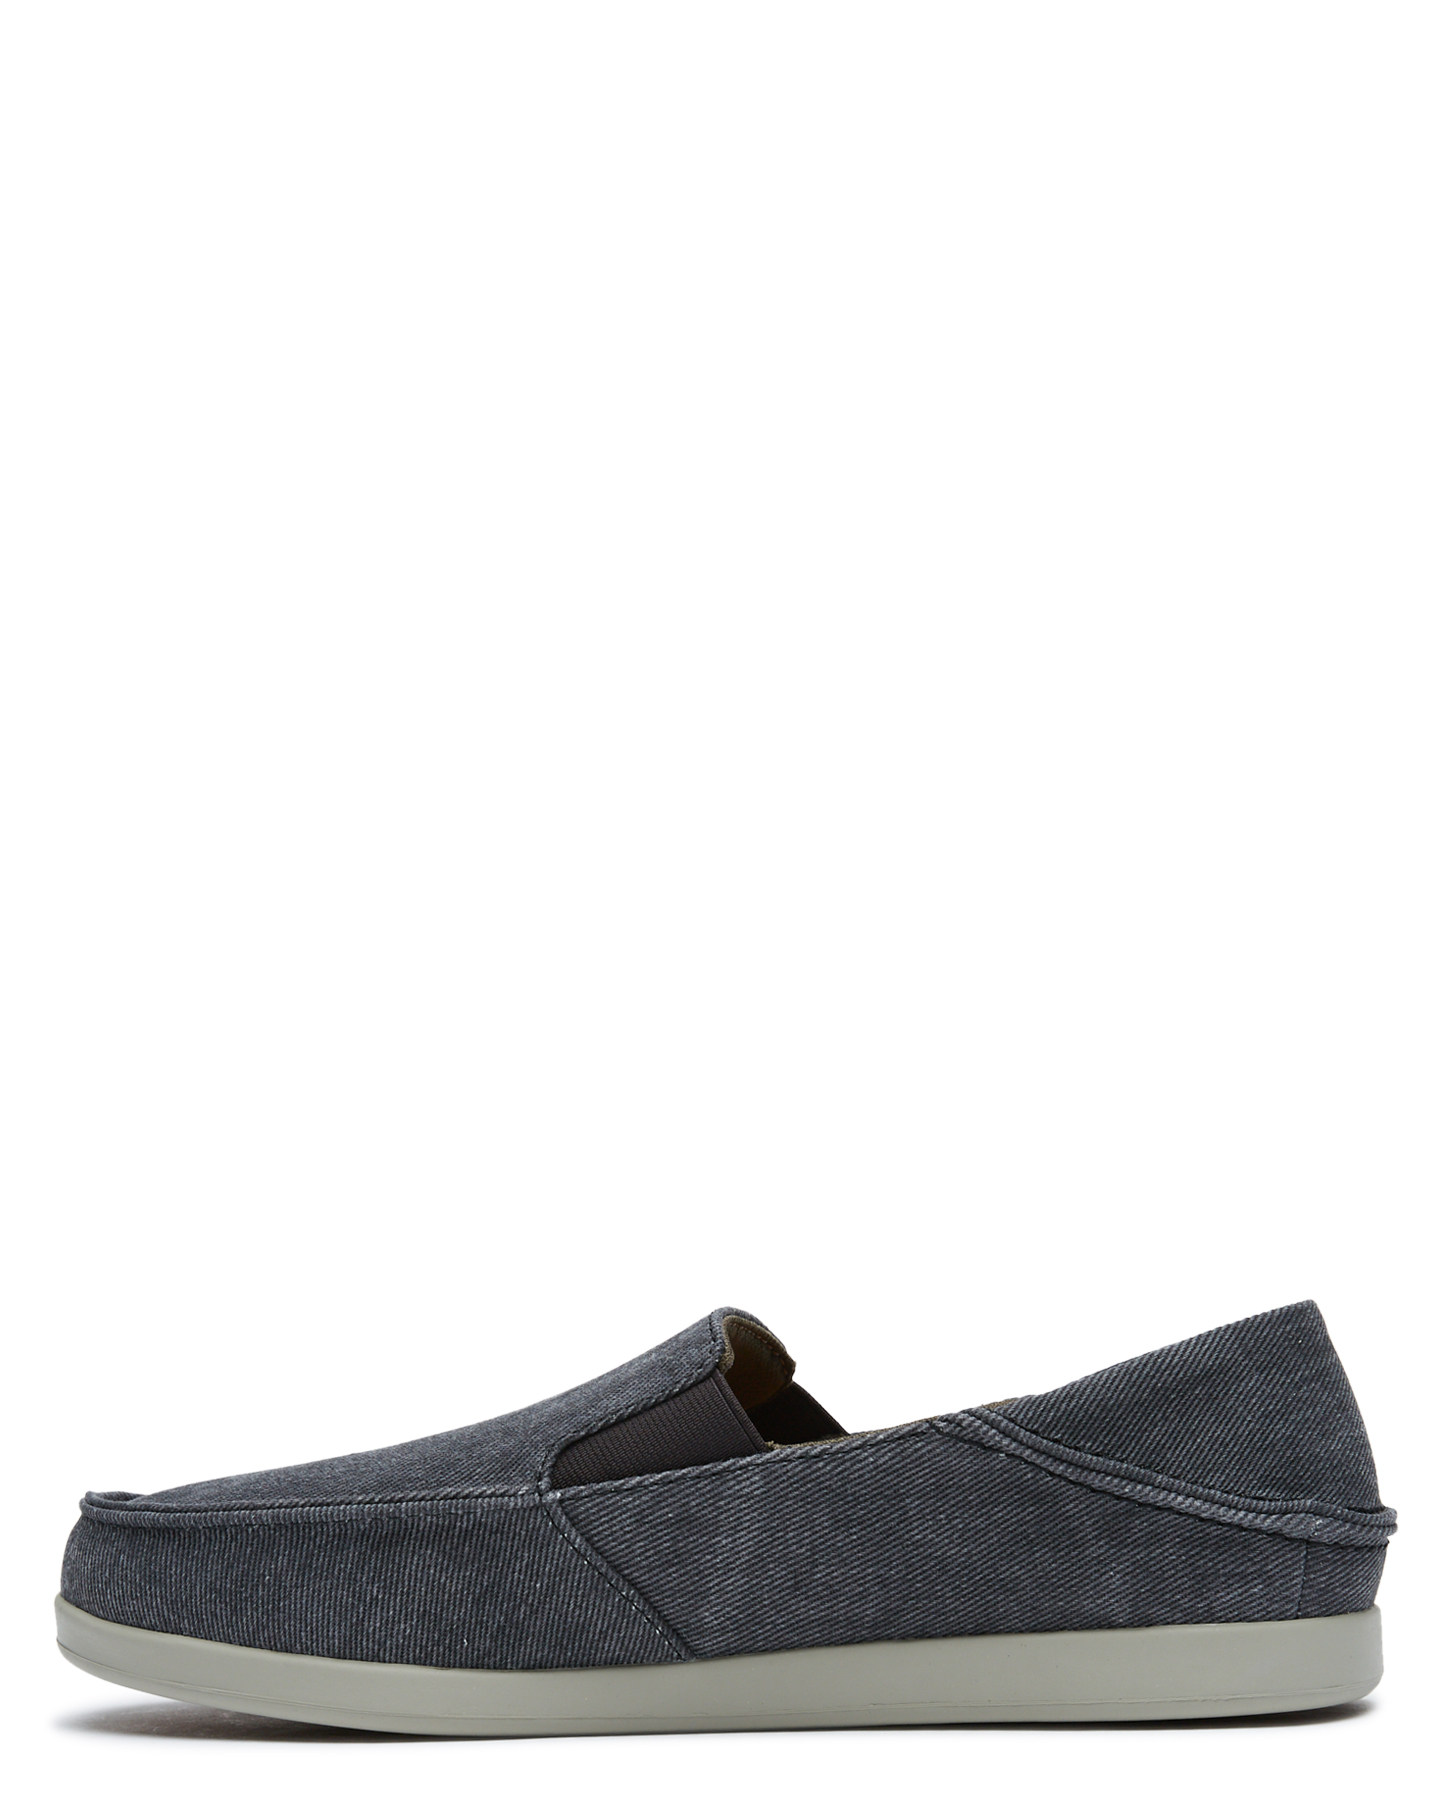 Reef Mens Cushion Matey Washed Canvas Shoe - Lava Rock | SurfStitch